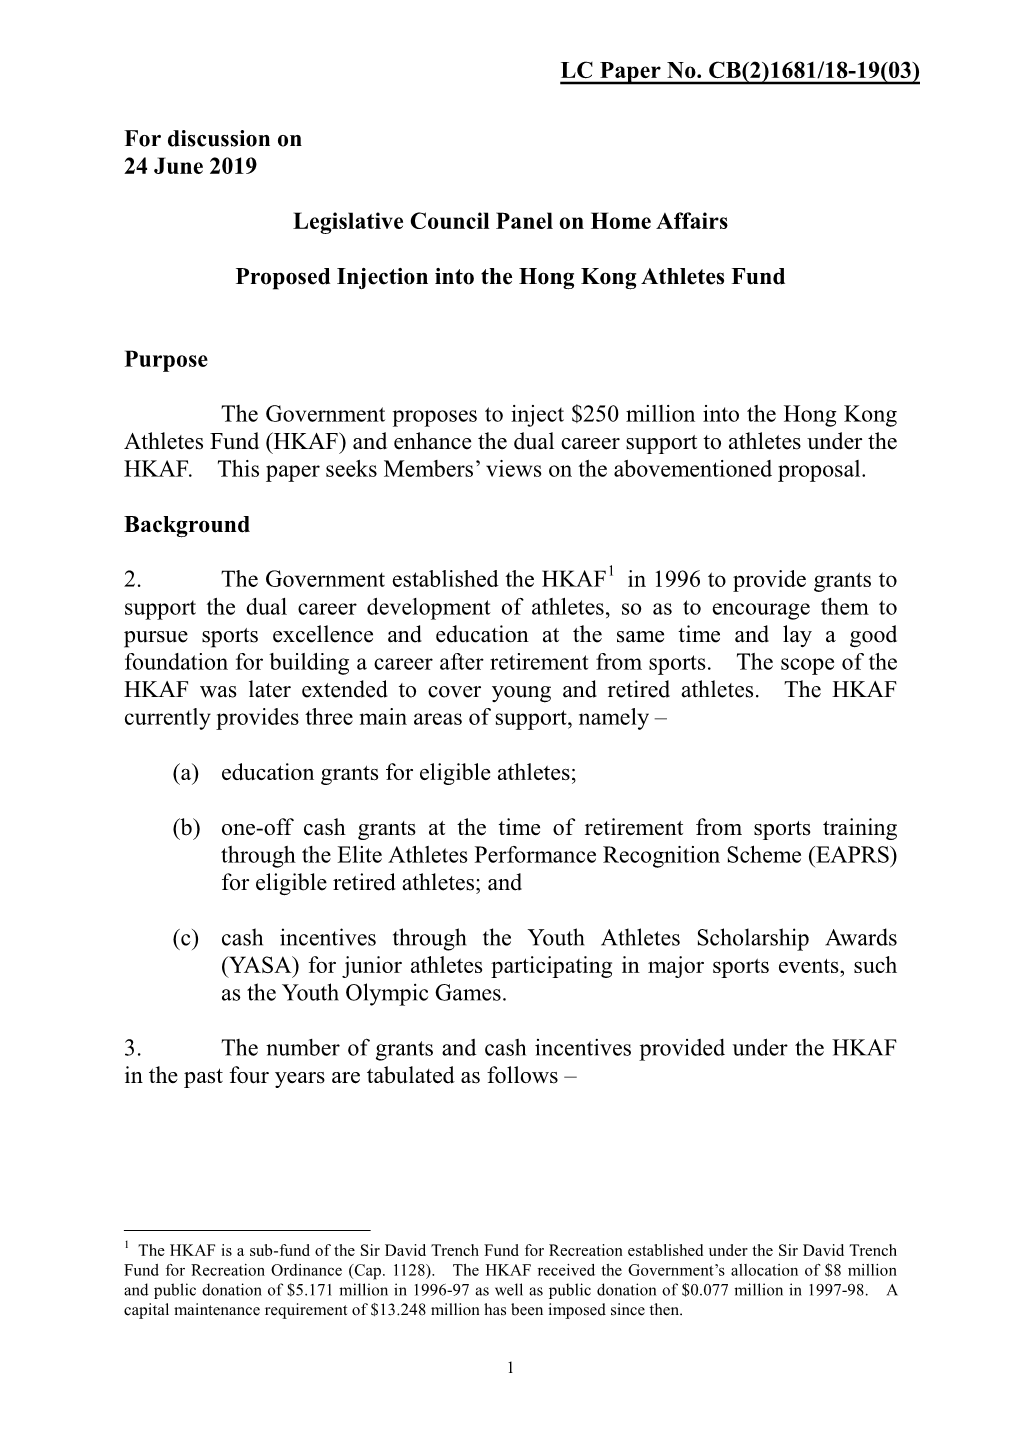 Administration's Paper on Proposed Injection Into the Hong Kong